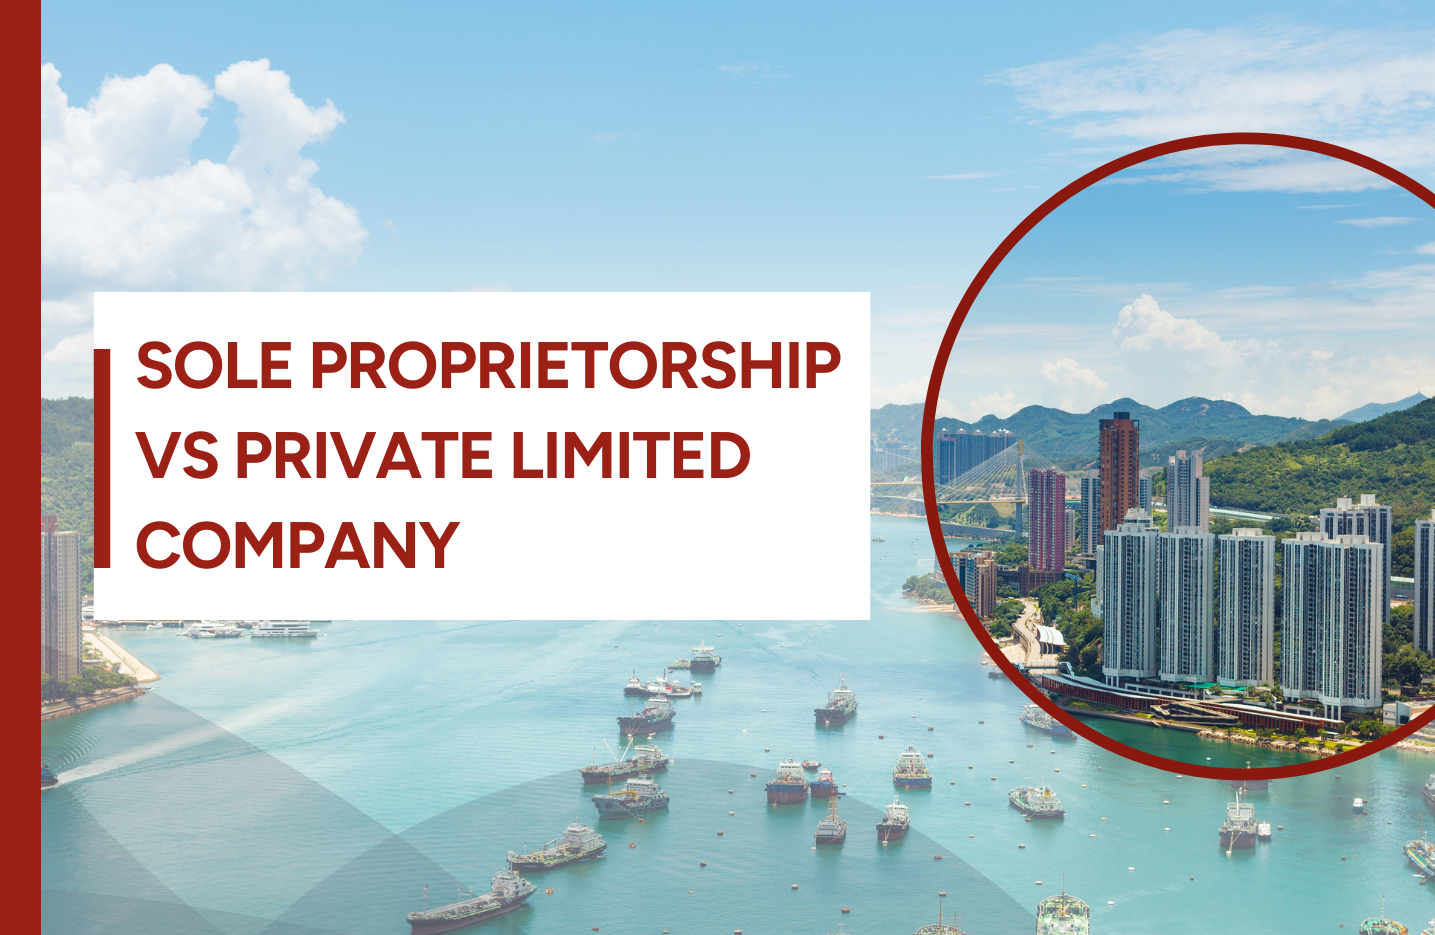 Hong Kong: All the information you require about sole proprietorship versus private limited companies